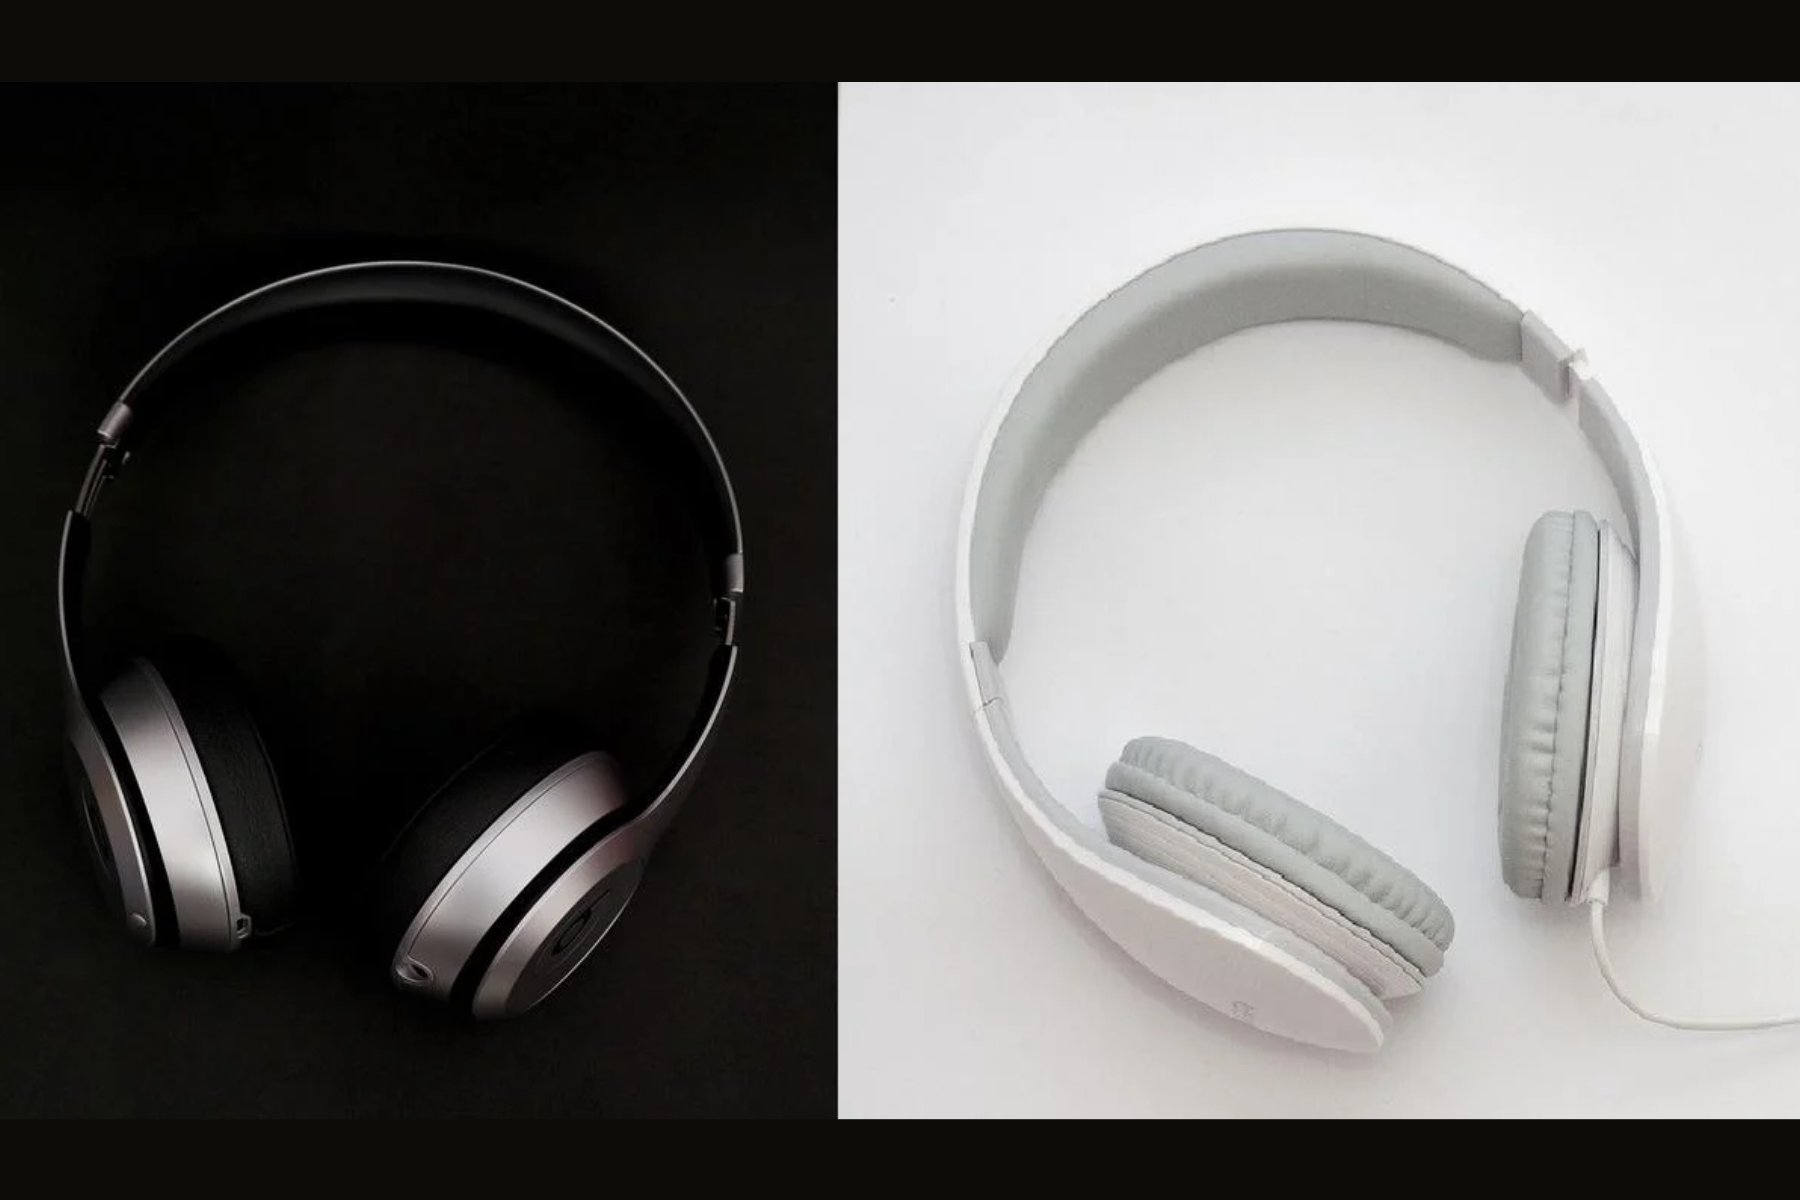 Are Wired Headphones Safer Than Wireless - The Great Headphone Debate